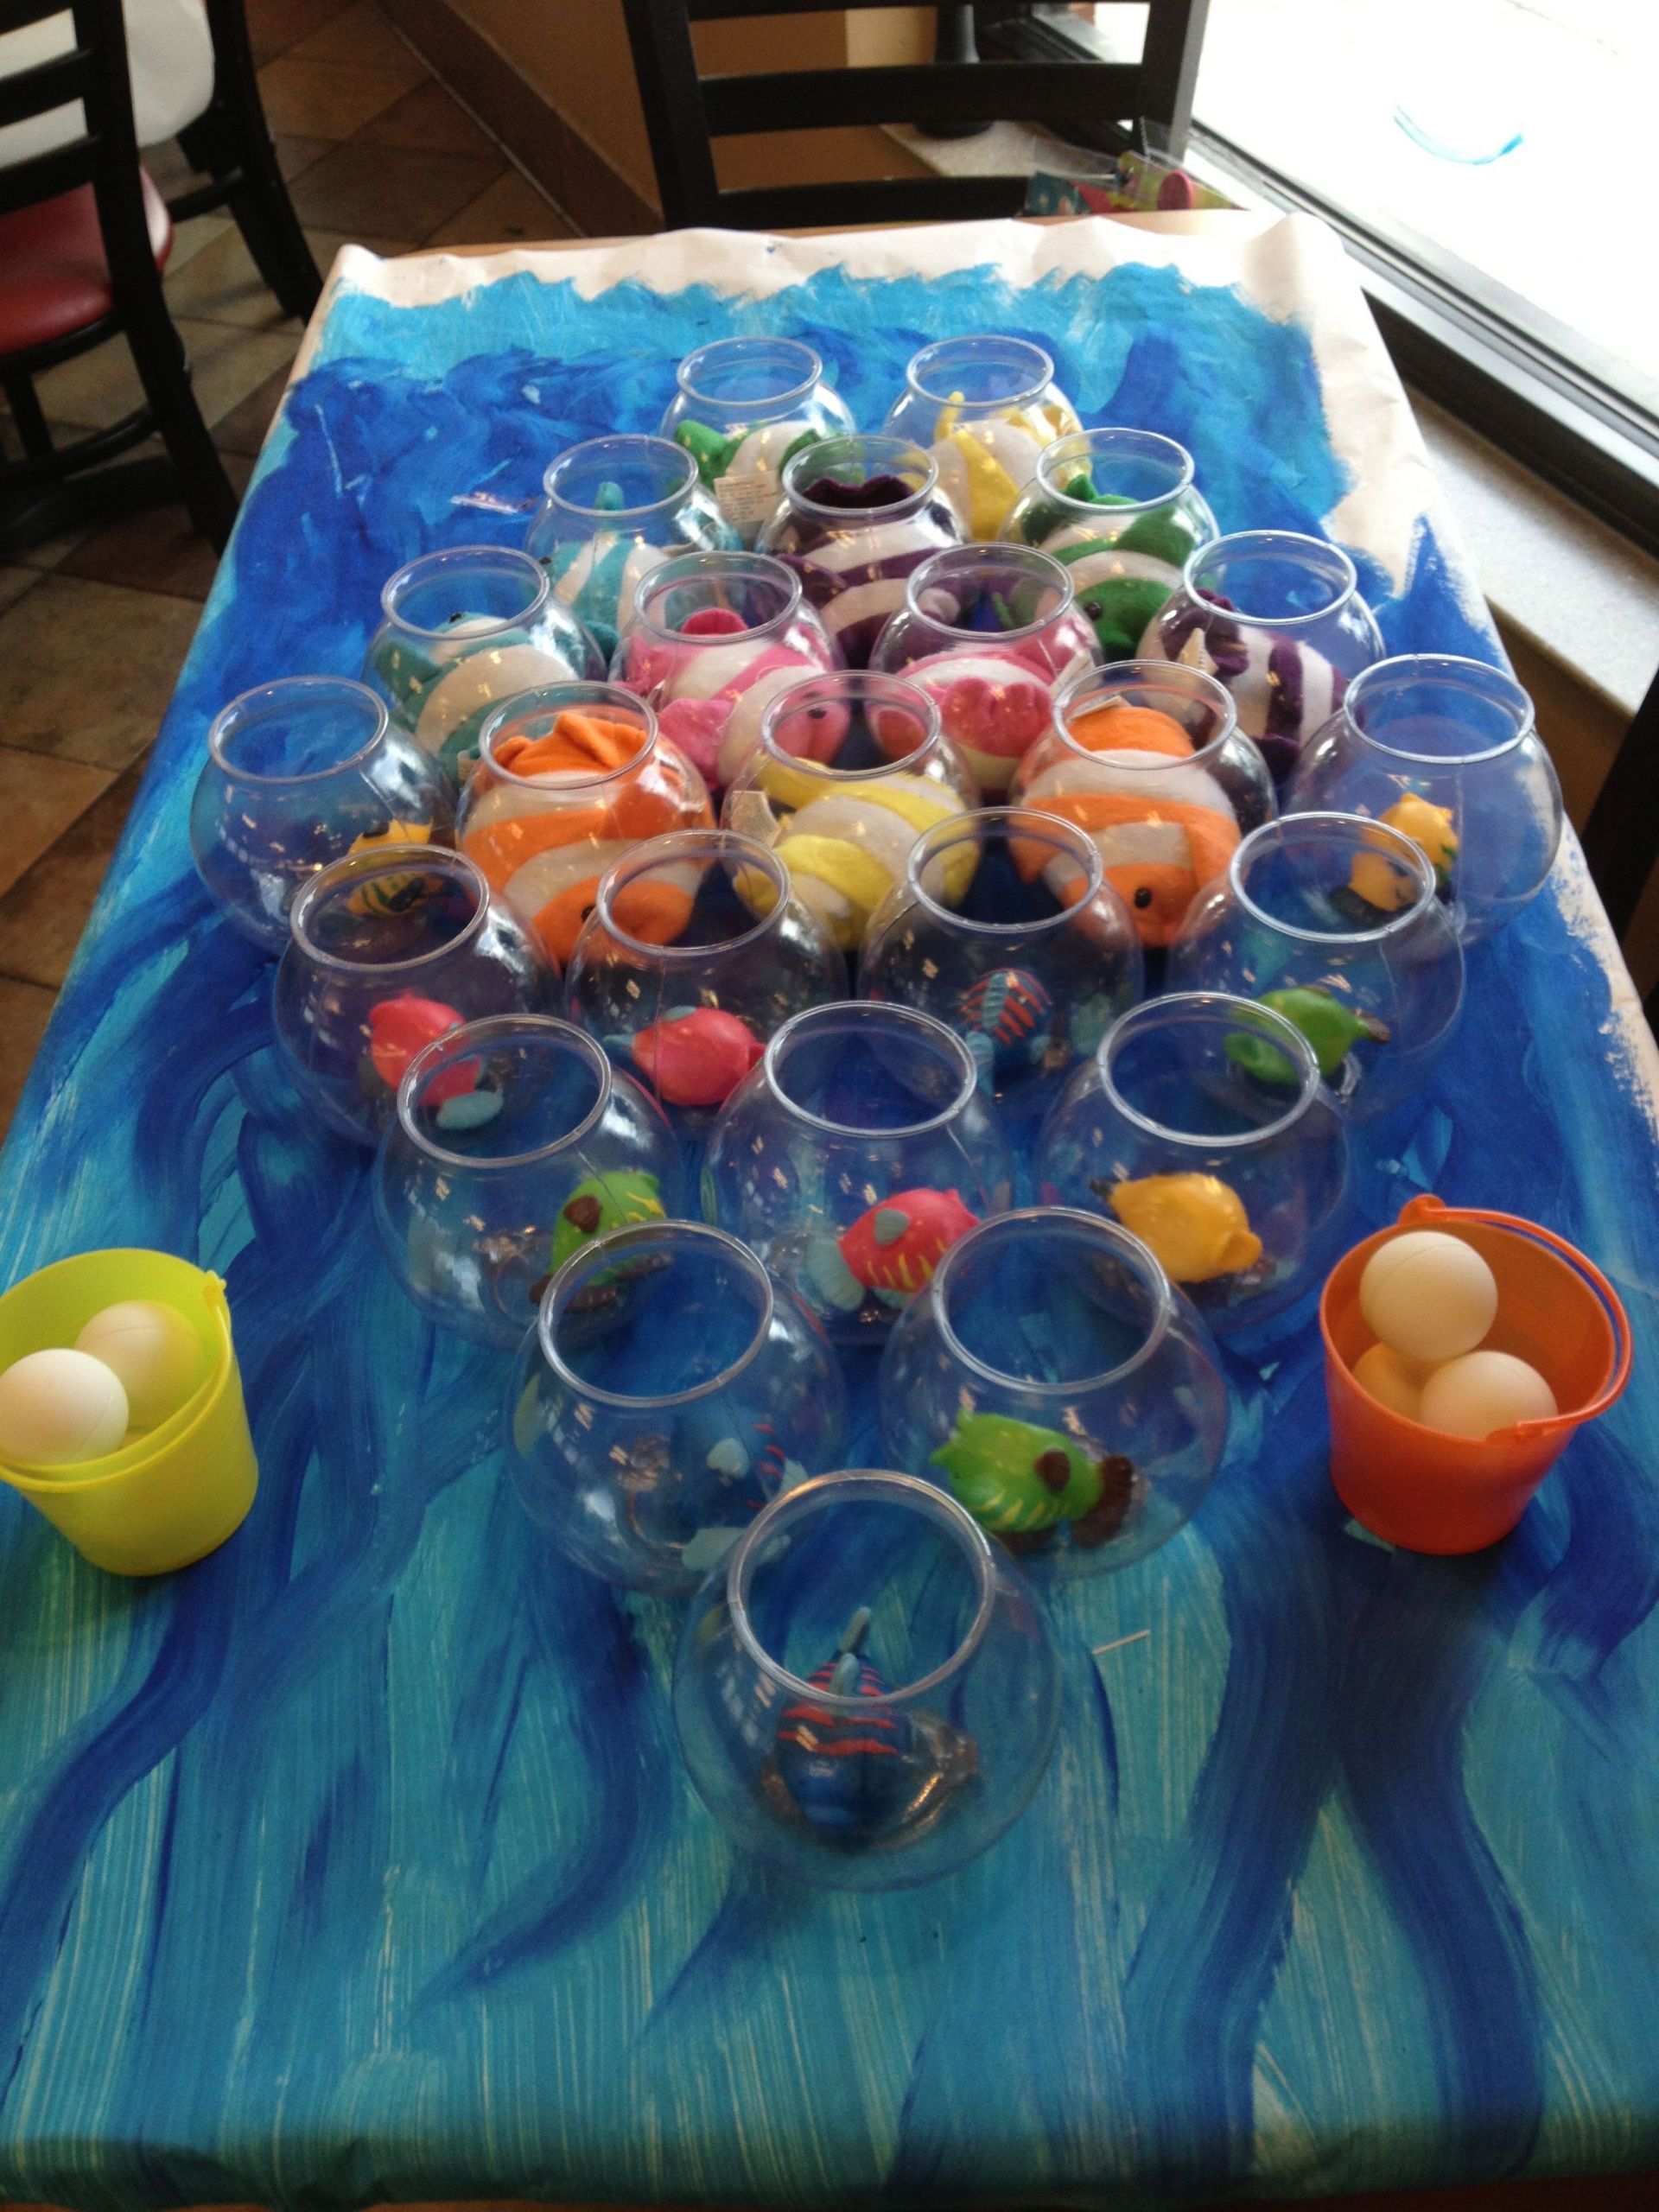 Beach Birthday Party Game Ideas
 This fun under the sea themed game was found online at a